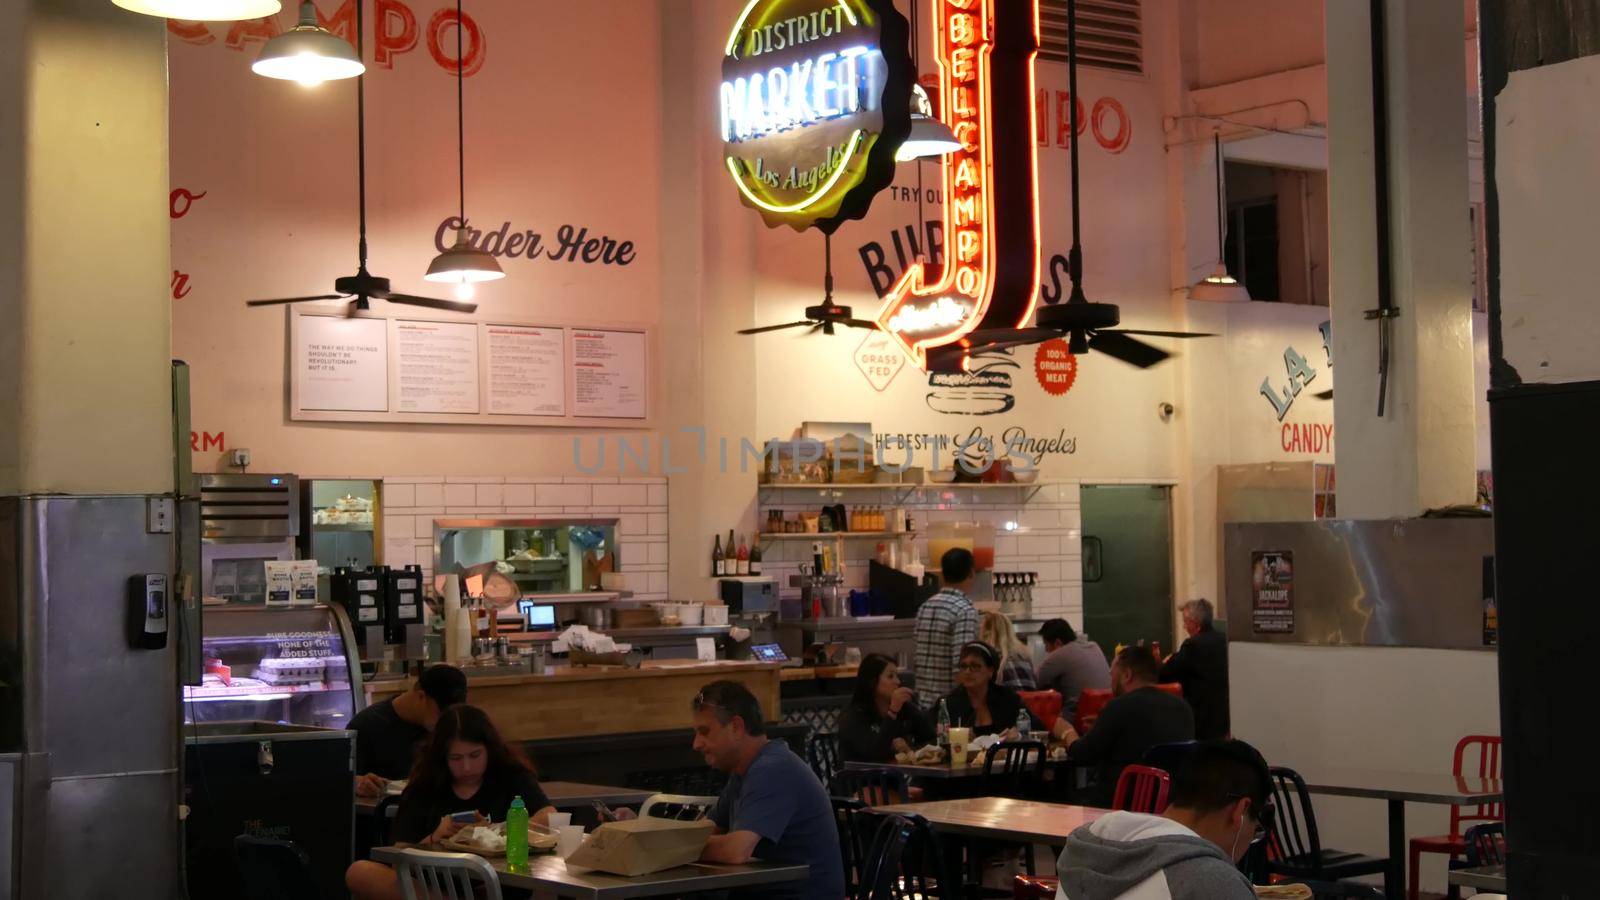 LOS ANGELES, CALIFORNIA, USA - 30 OCT 2019: Grand central market street lunch shops with diversity of glowing retro neon signs. Multiracial people on foodcourt. Citizens dining with fast food in LA.